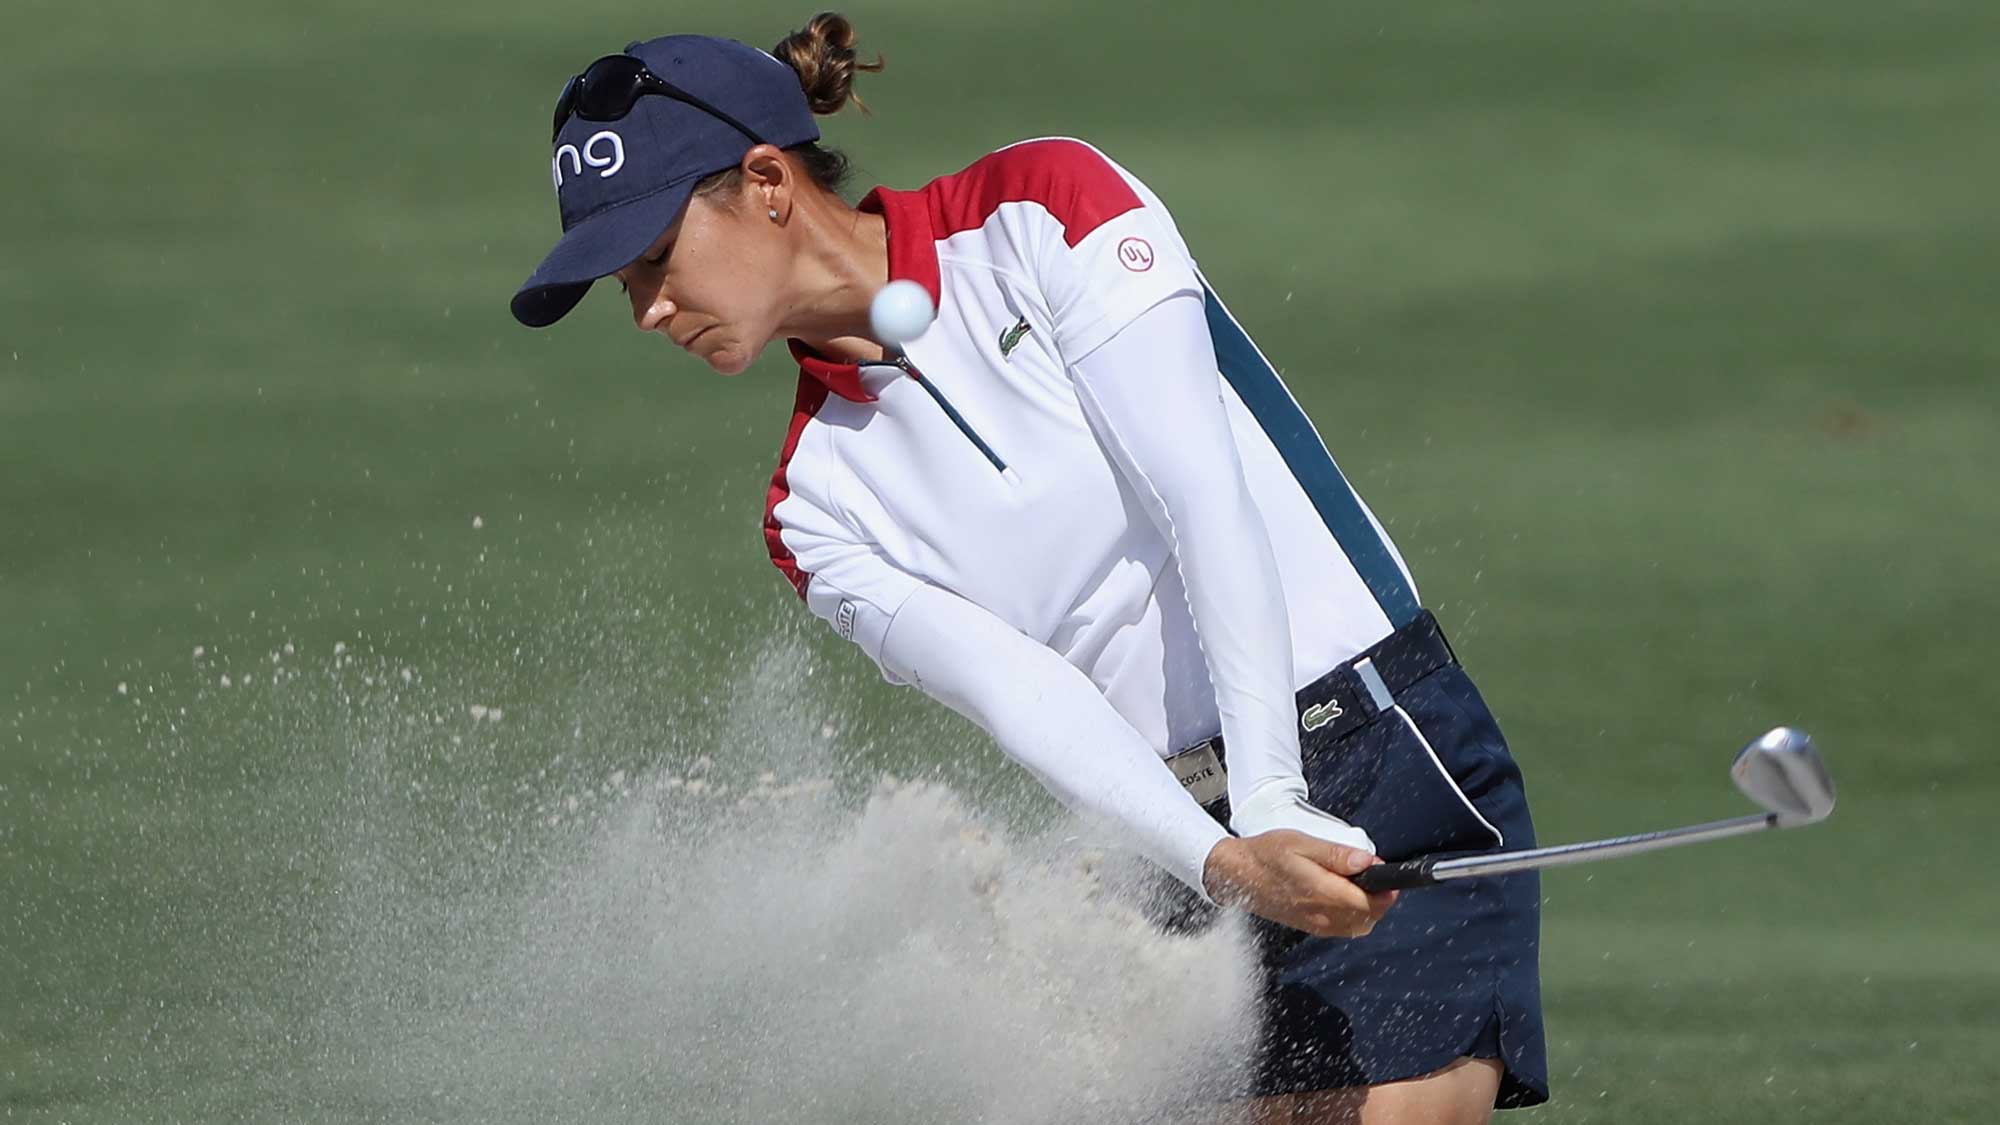 Azahara Munoz of Spain plays a shot from a bunker on the sixth hole during round two of the CME Group Tour Championship